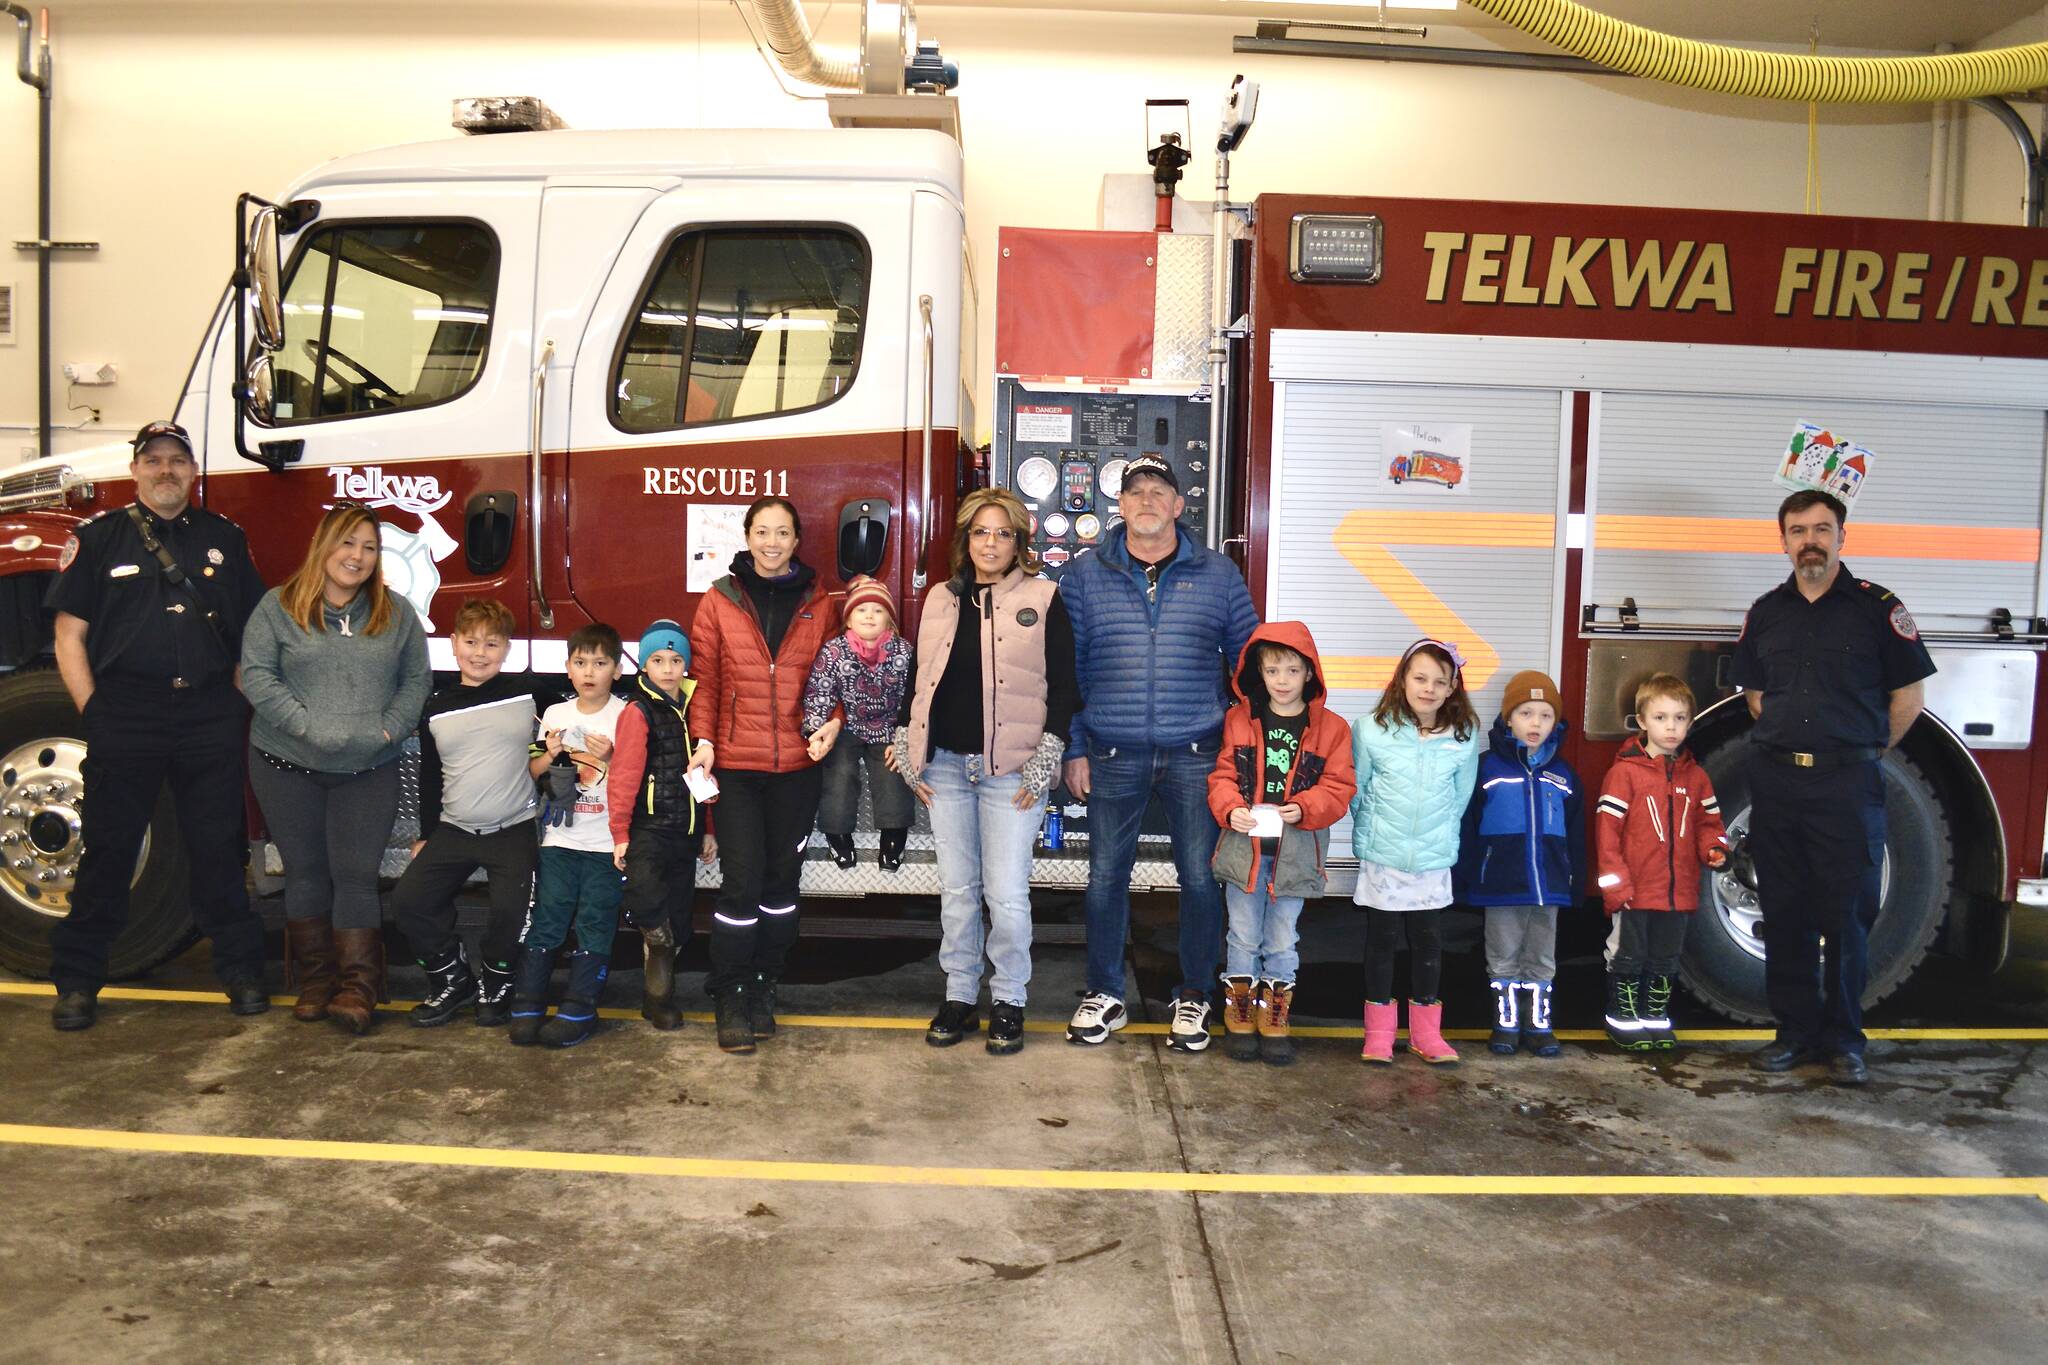 31734203_web1_230209-SIN-Telkwa-Elementary-students-decorate-fire-truck-in-art-photos_1